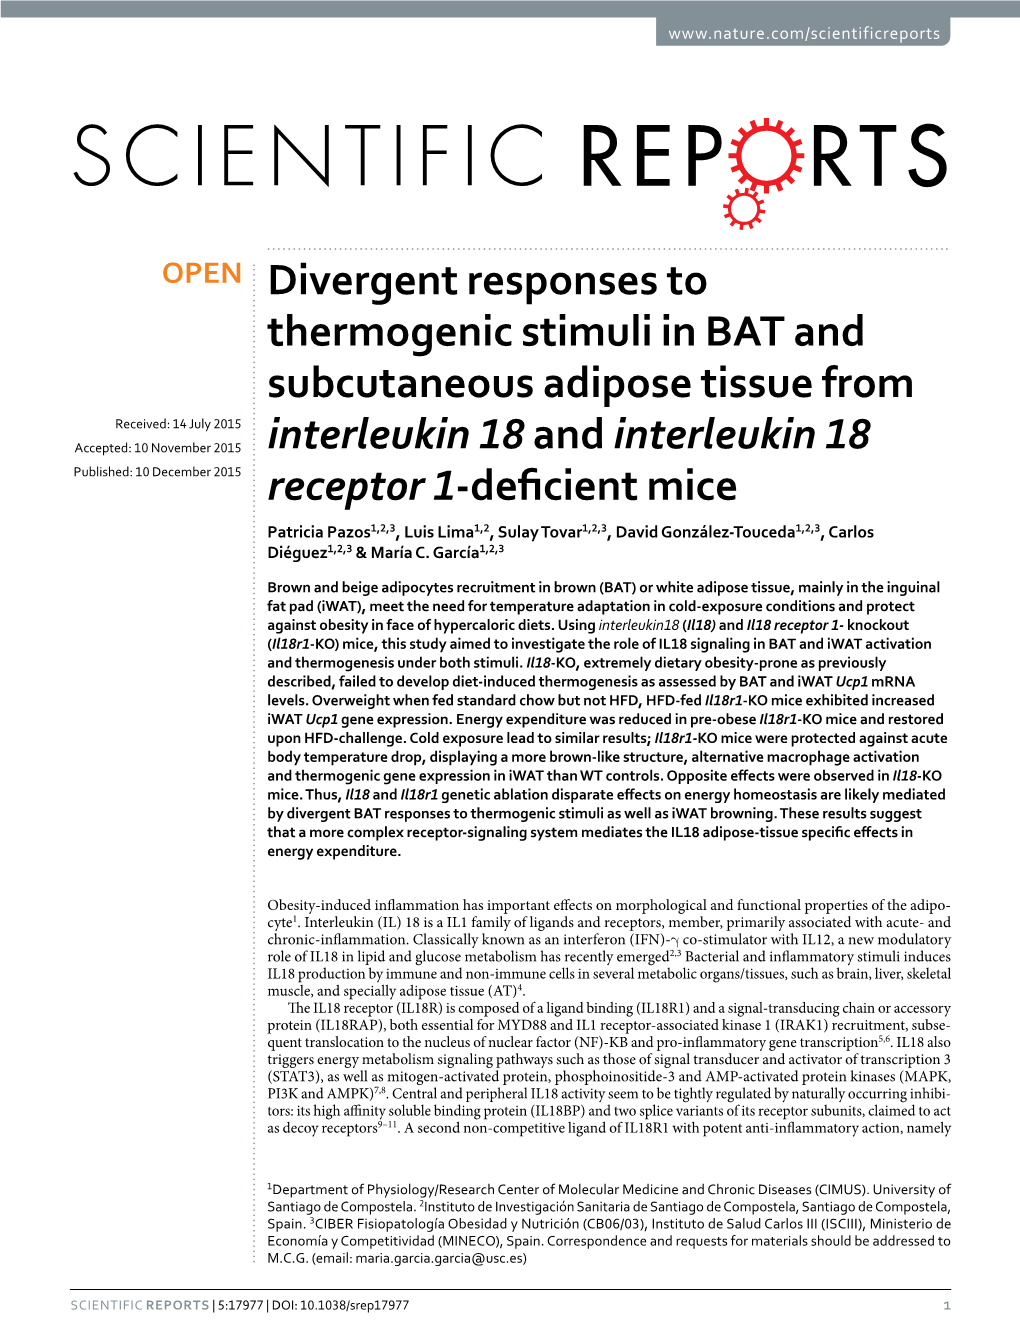 Divergent Responses to Thermogenic Stimuli in BAT and Subcutaneous